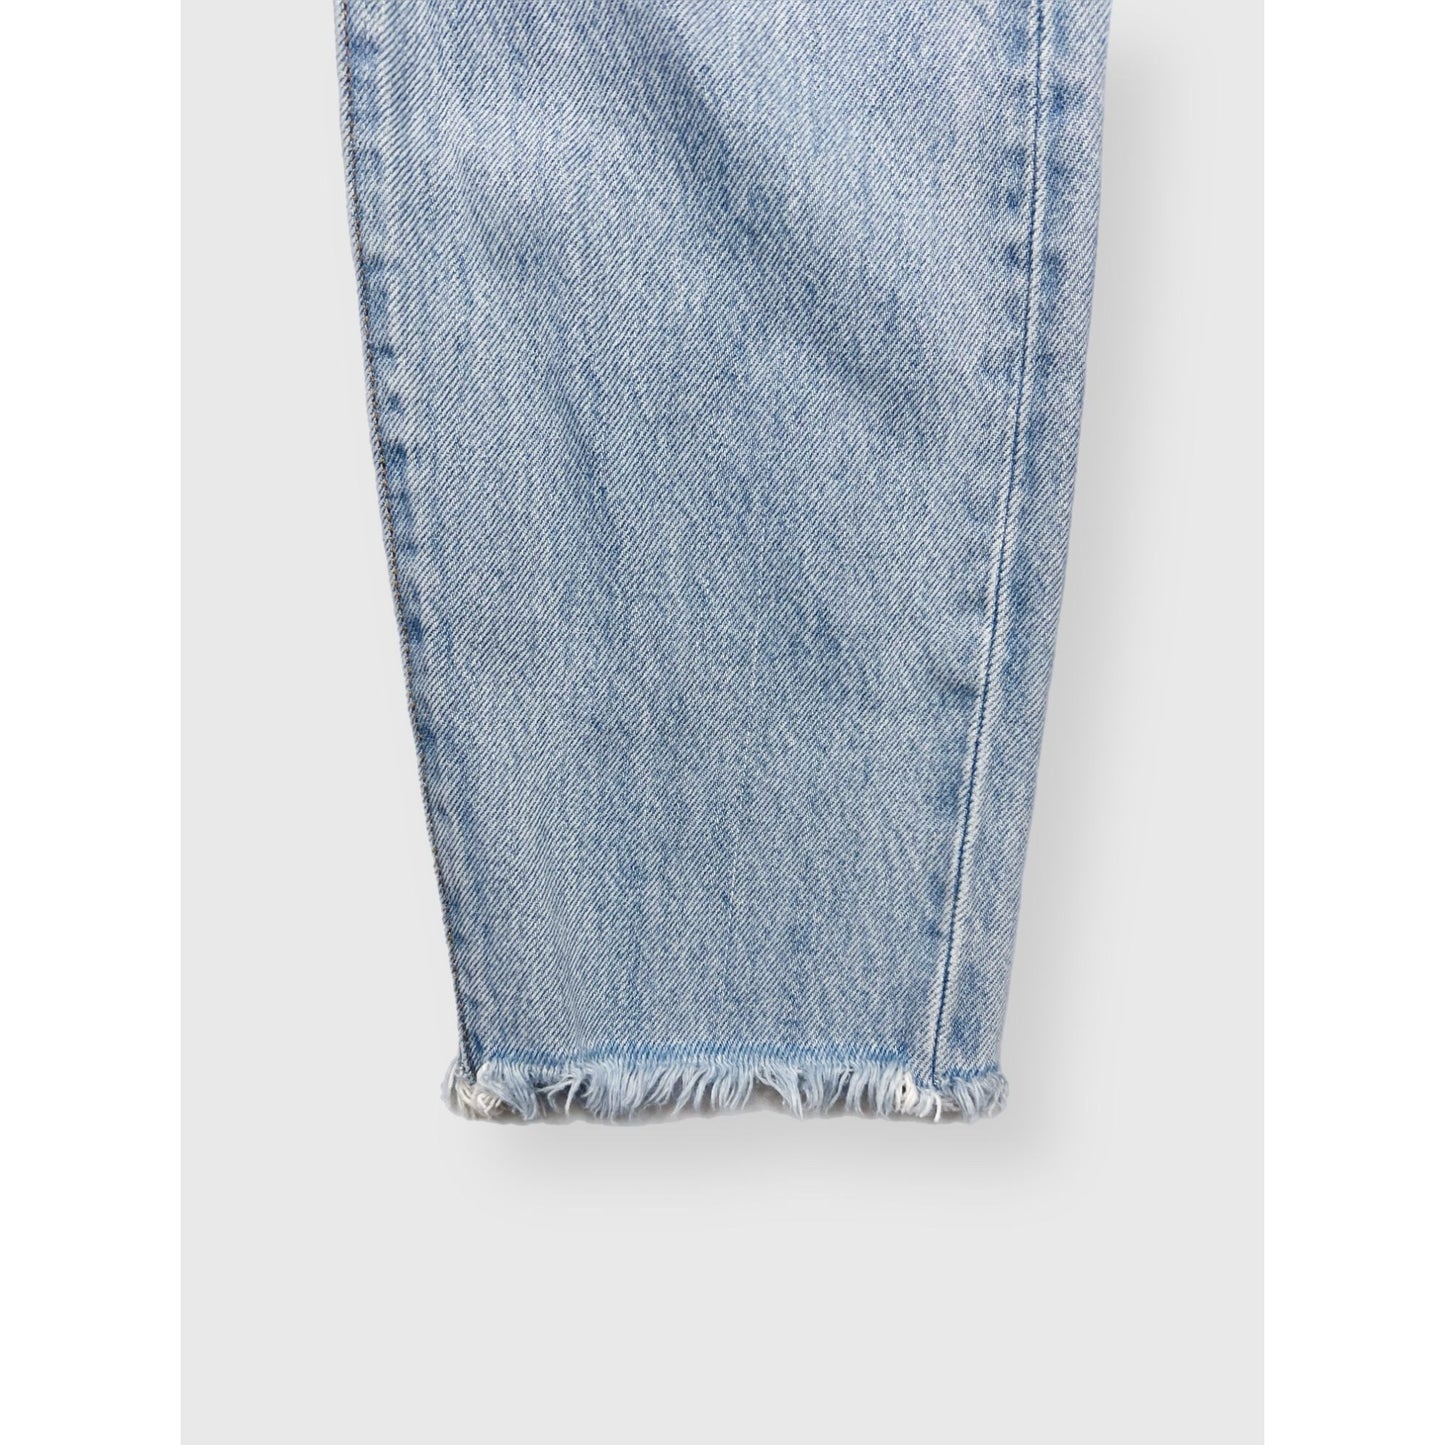 Levi’s Button Fly Wedgie Jeans - 27